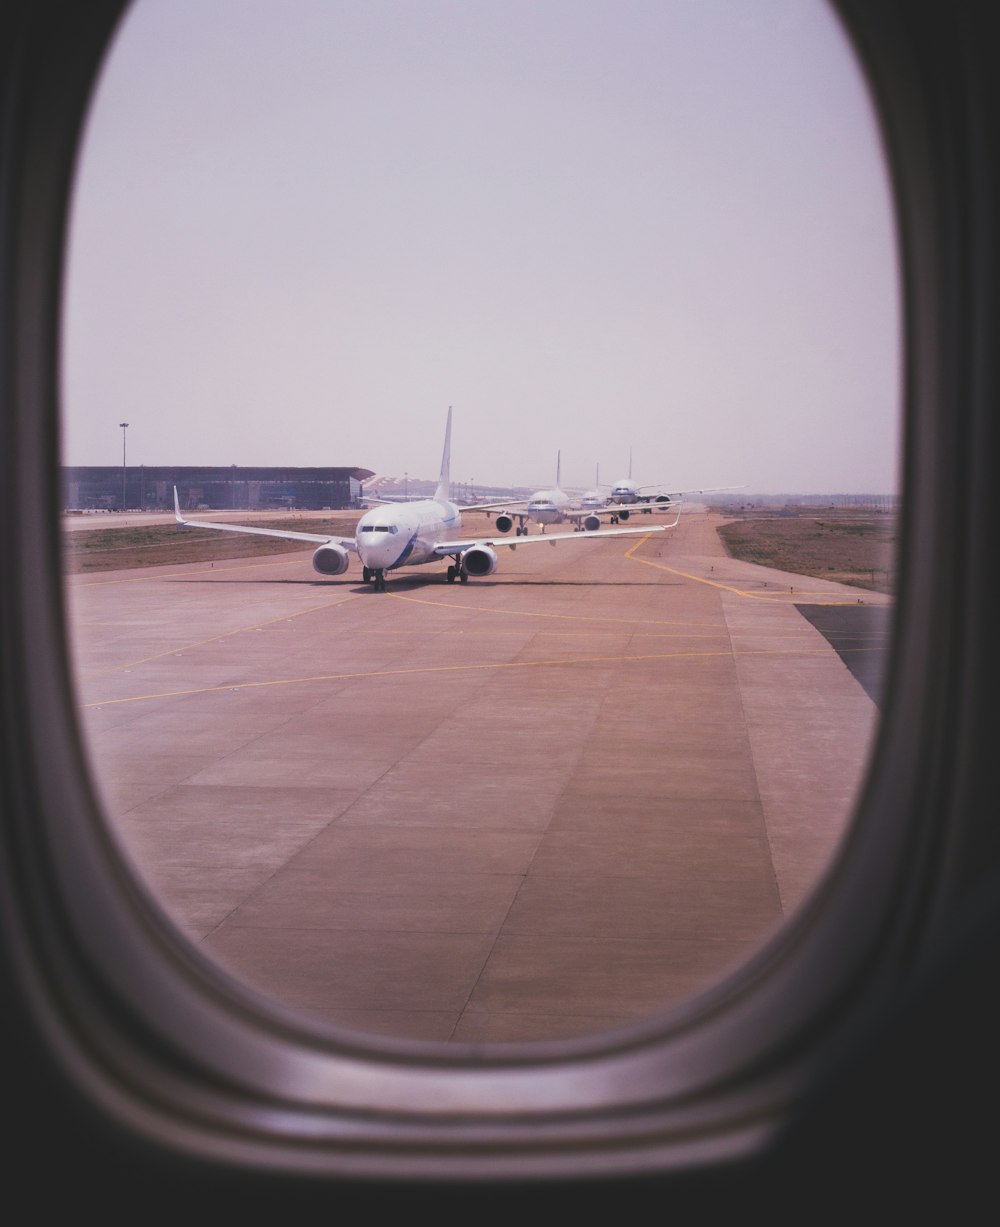 a view of an airplane from inside a window